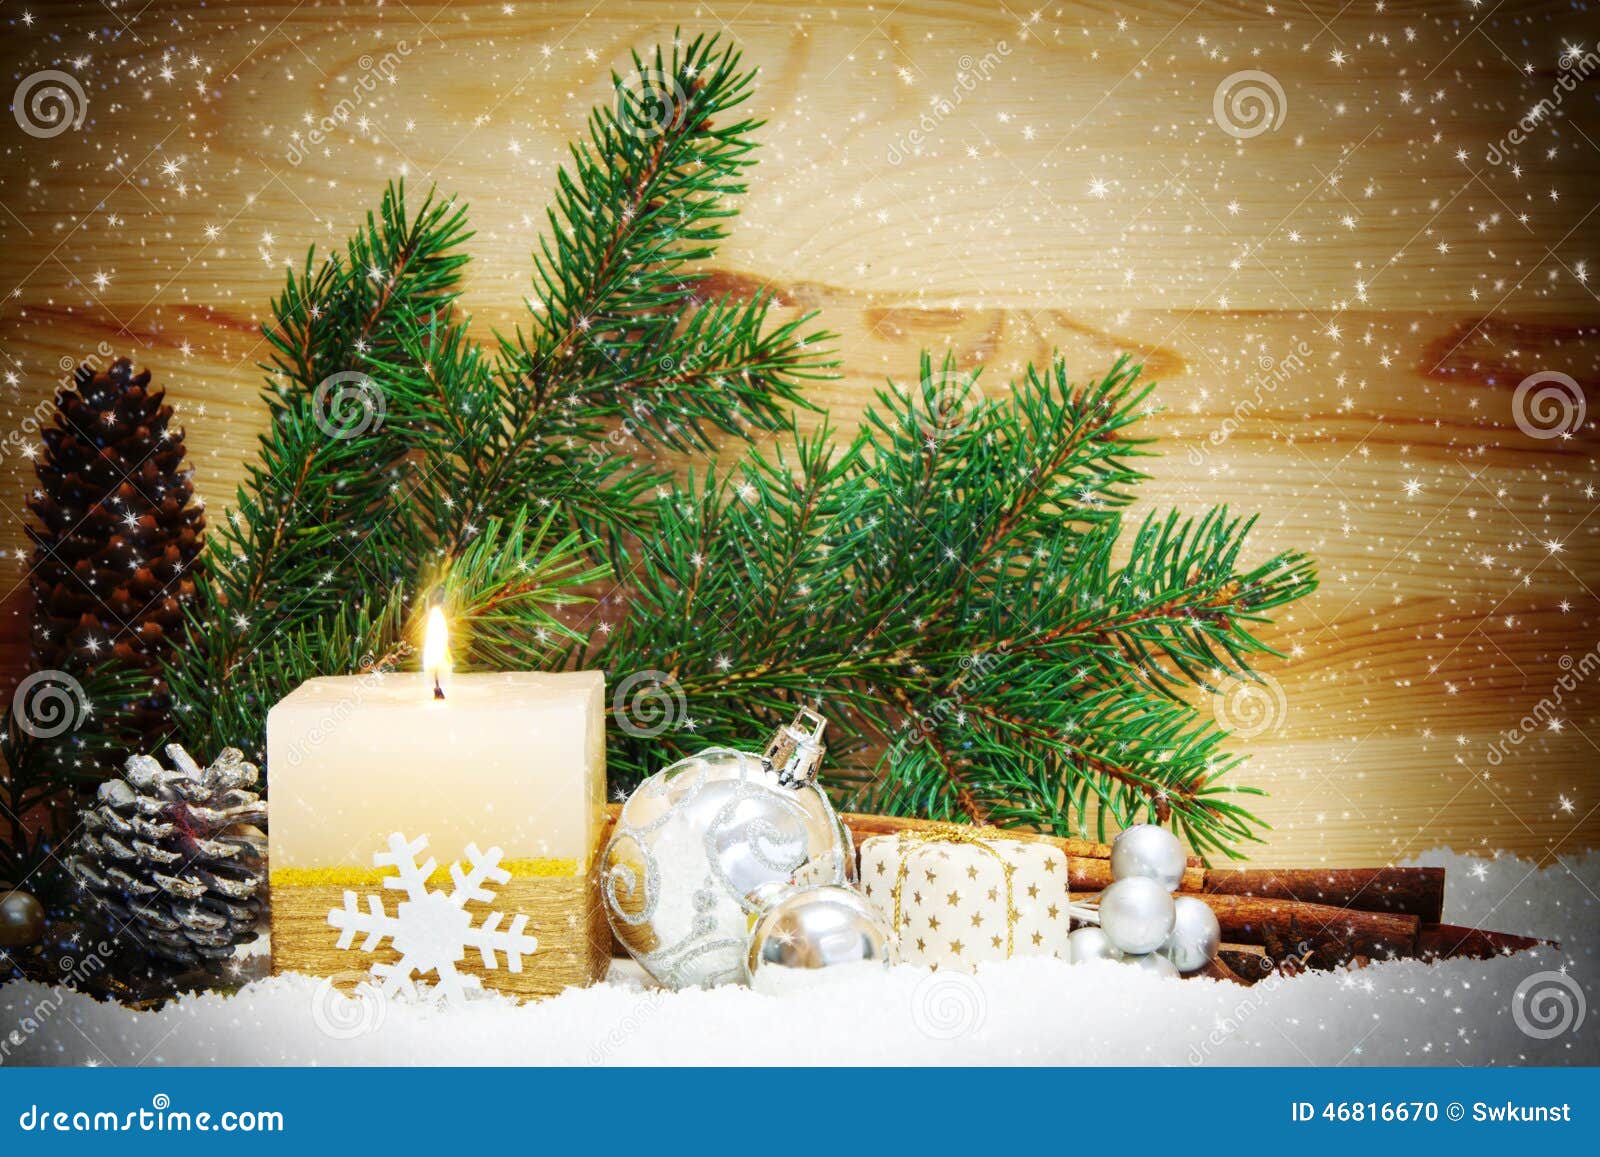 Download Christmas Background With White Advent Candle Stock Image of white holiday